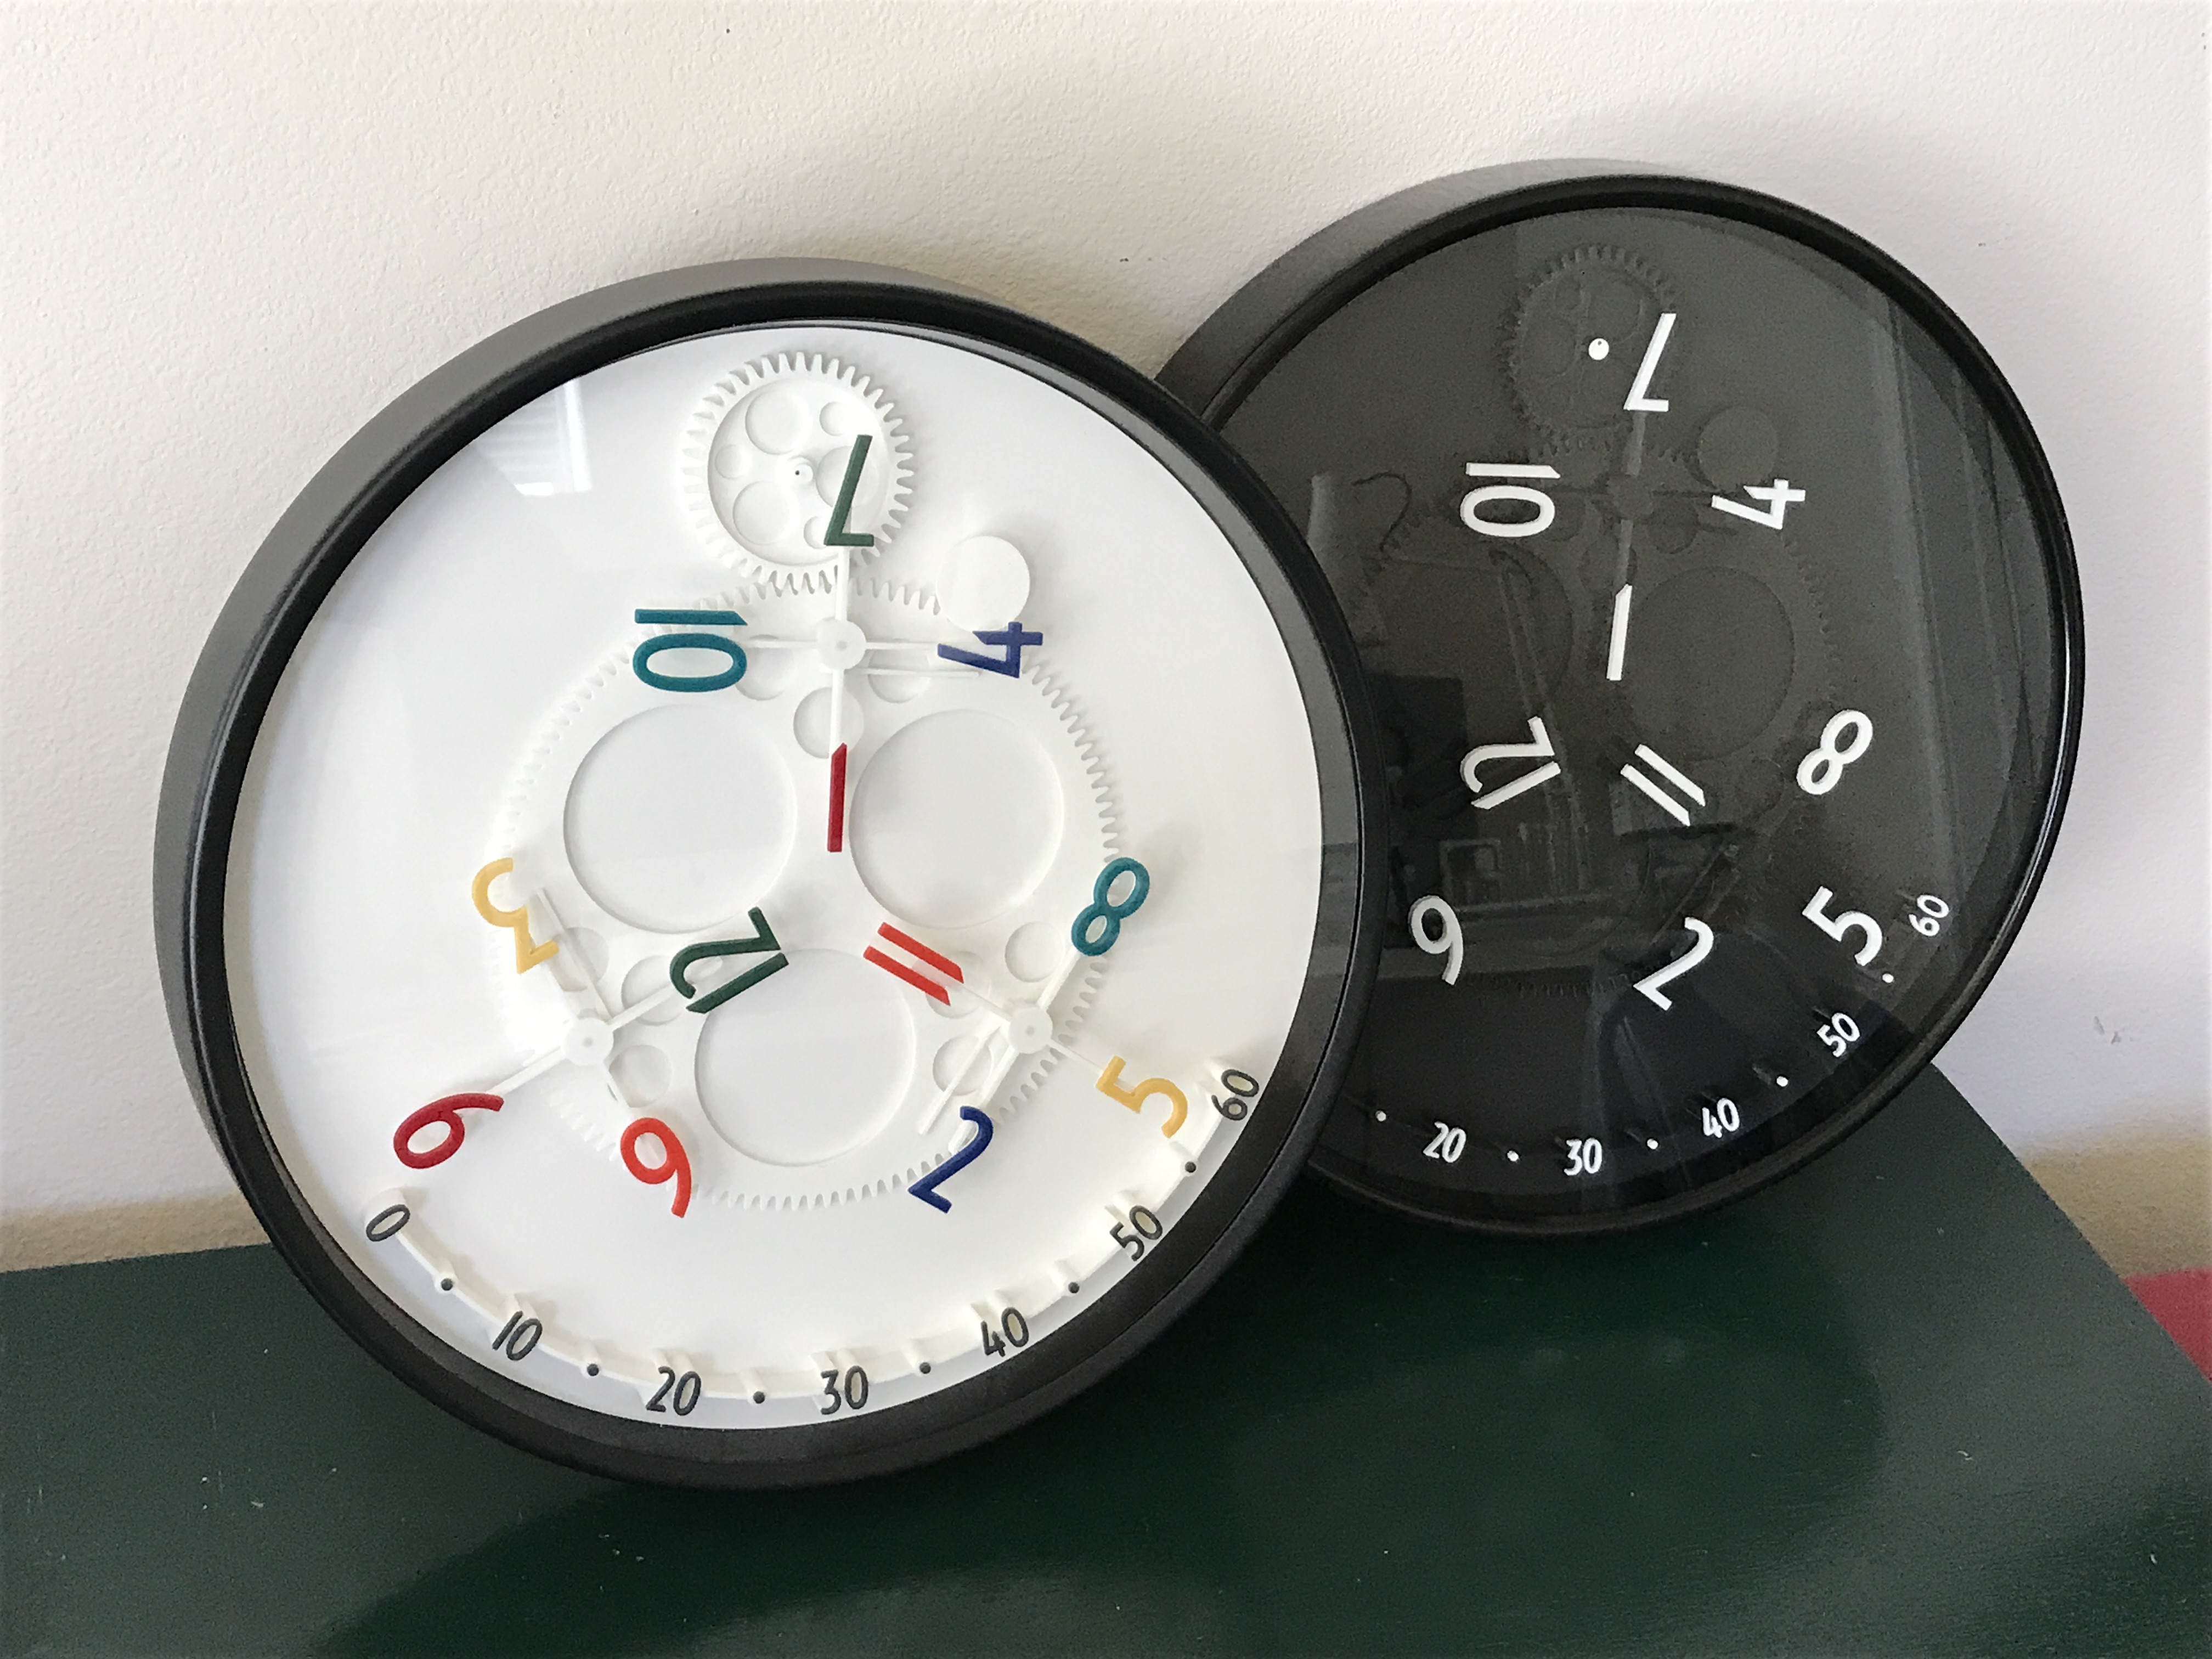 14 Printable Clock Faces (Free PDFs To Download & Print)